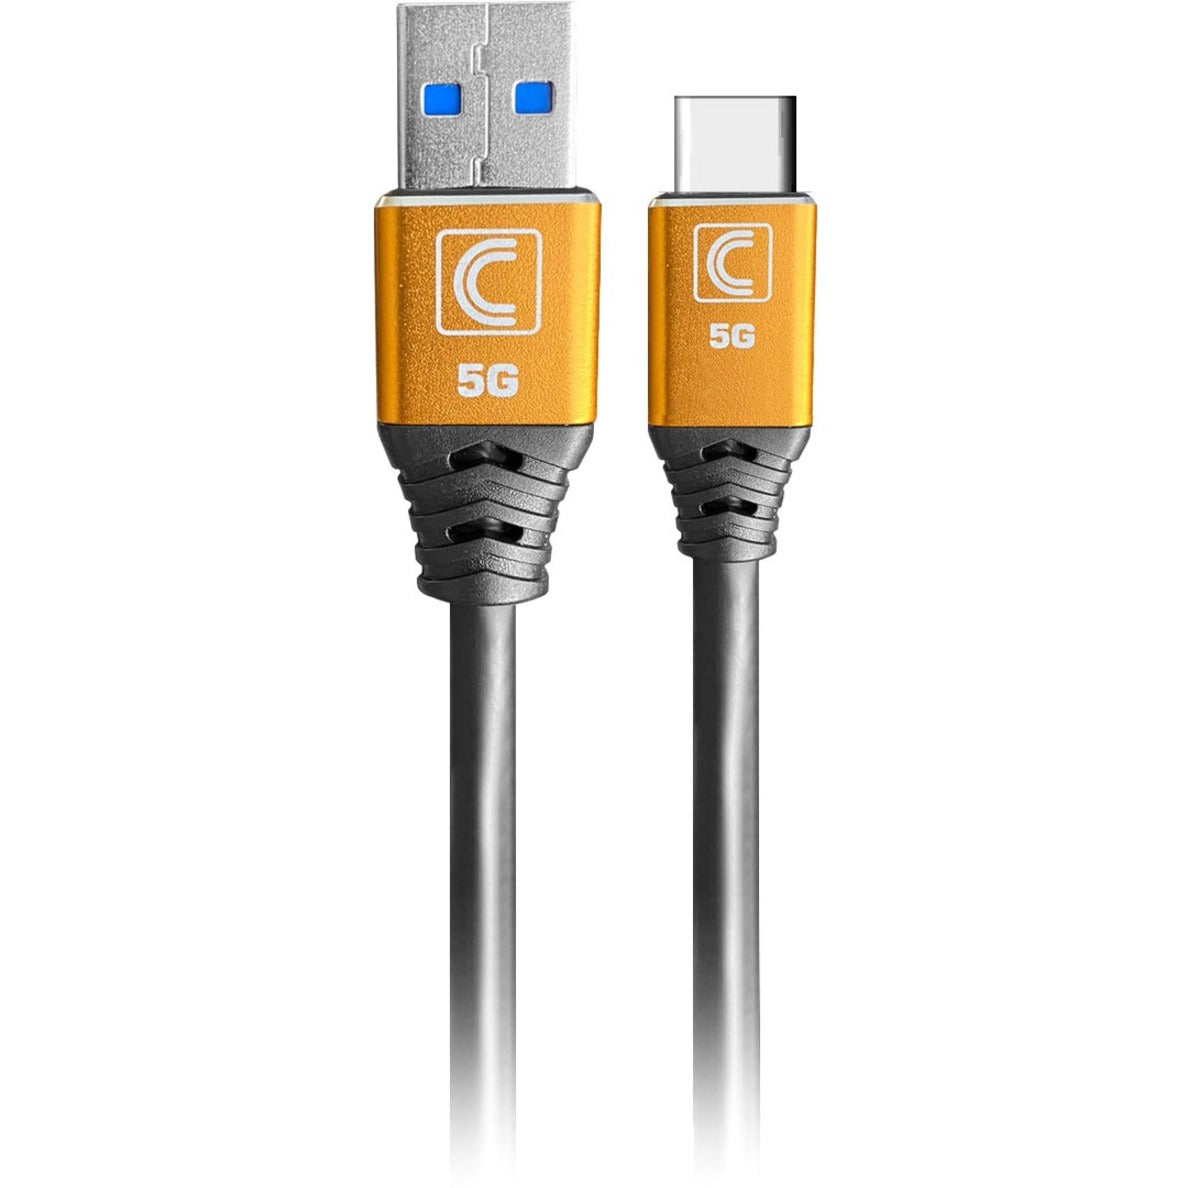 Comprehensive USB3-AC-15SP Pro AV/IT Specialist Series USB 3.0 (3.2 Gen1) 5G A Male to C Male Cable 15ft, Strain Relief, Bendable, Triple Shielded